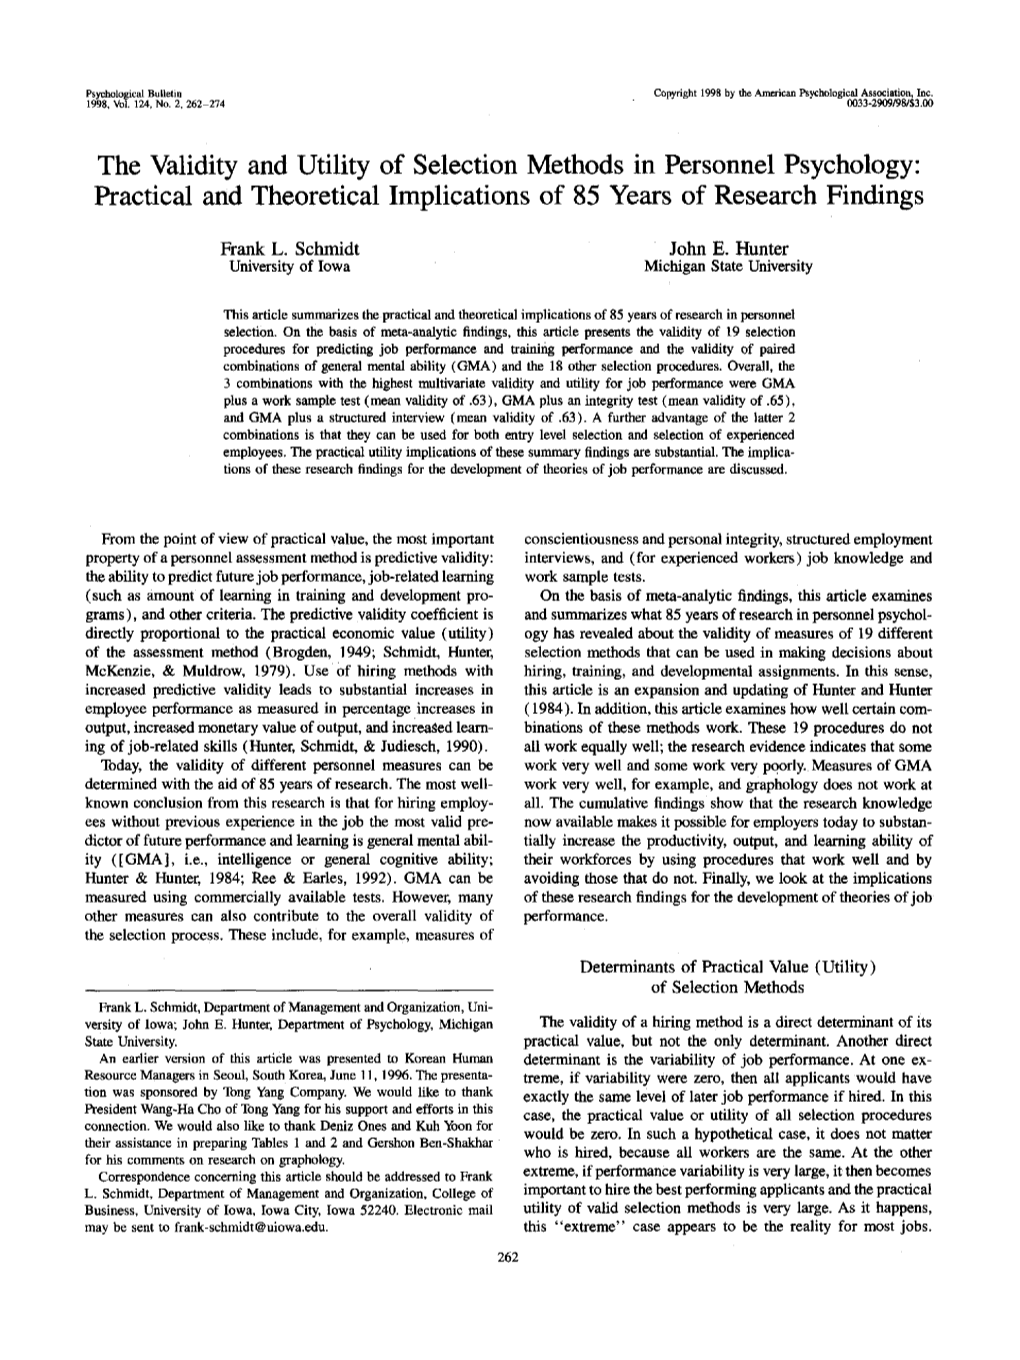 The Validity and Utility of Selection Methods in Personnel Psychology: Practical and Theoretical Implications of 85 Years of Research Findings